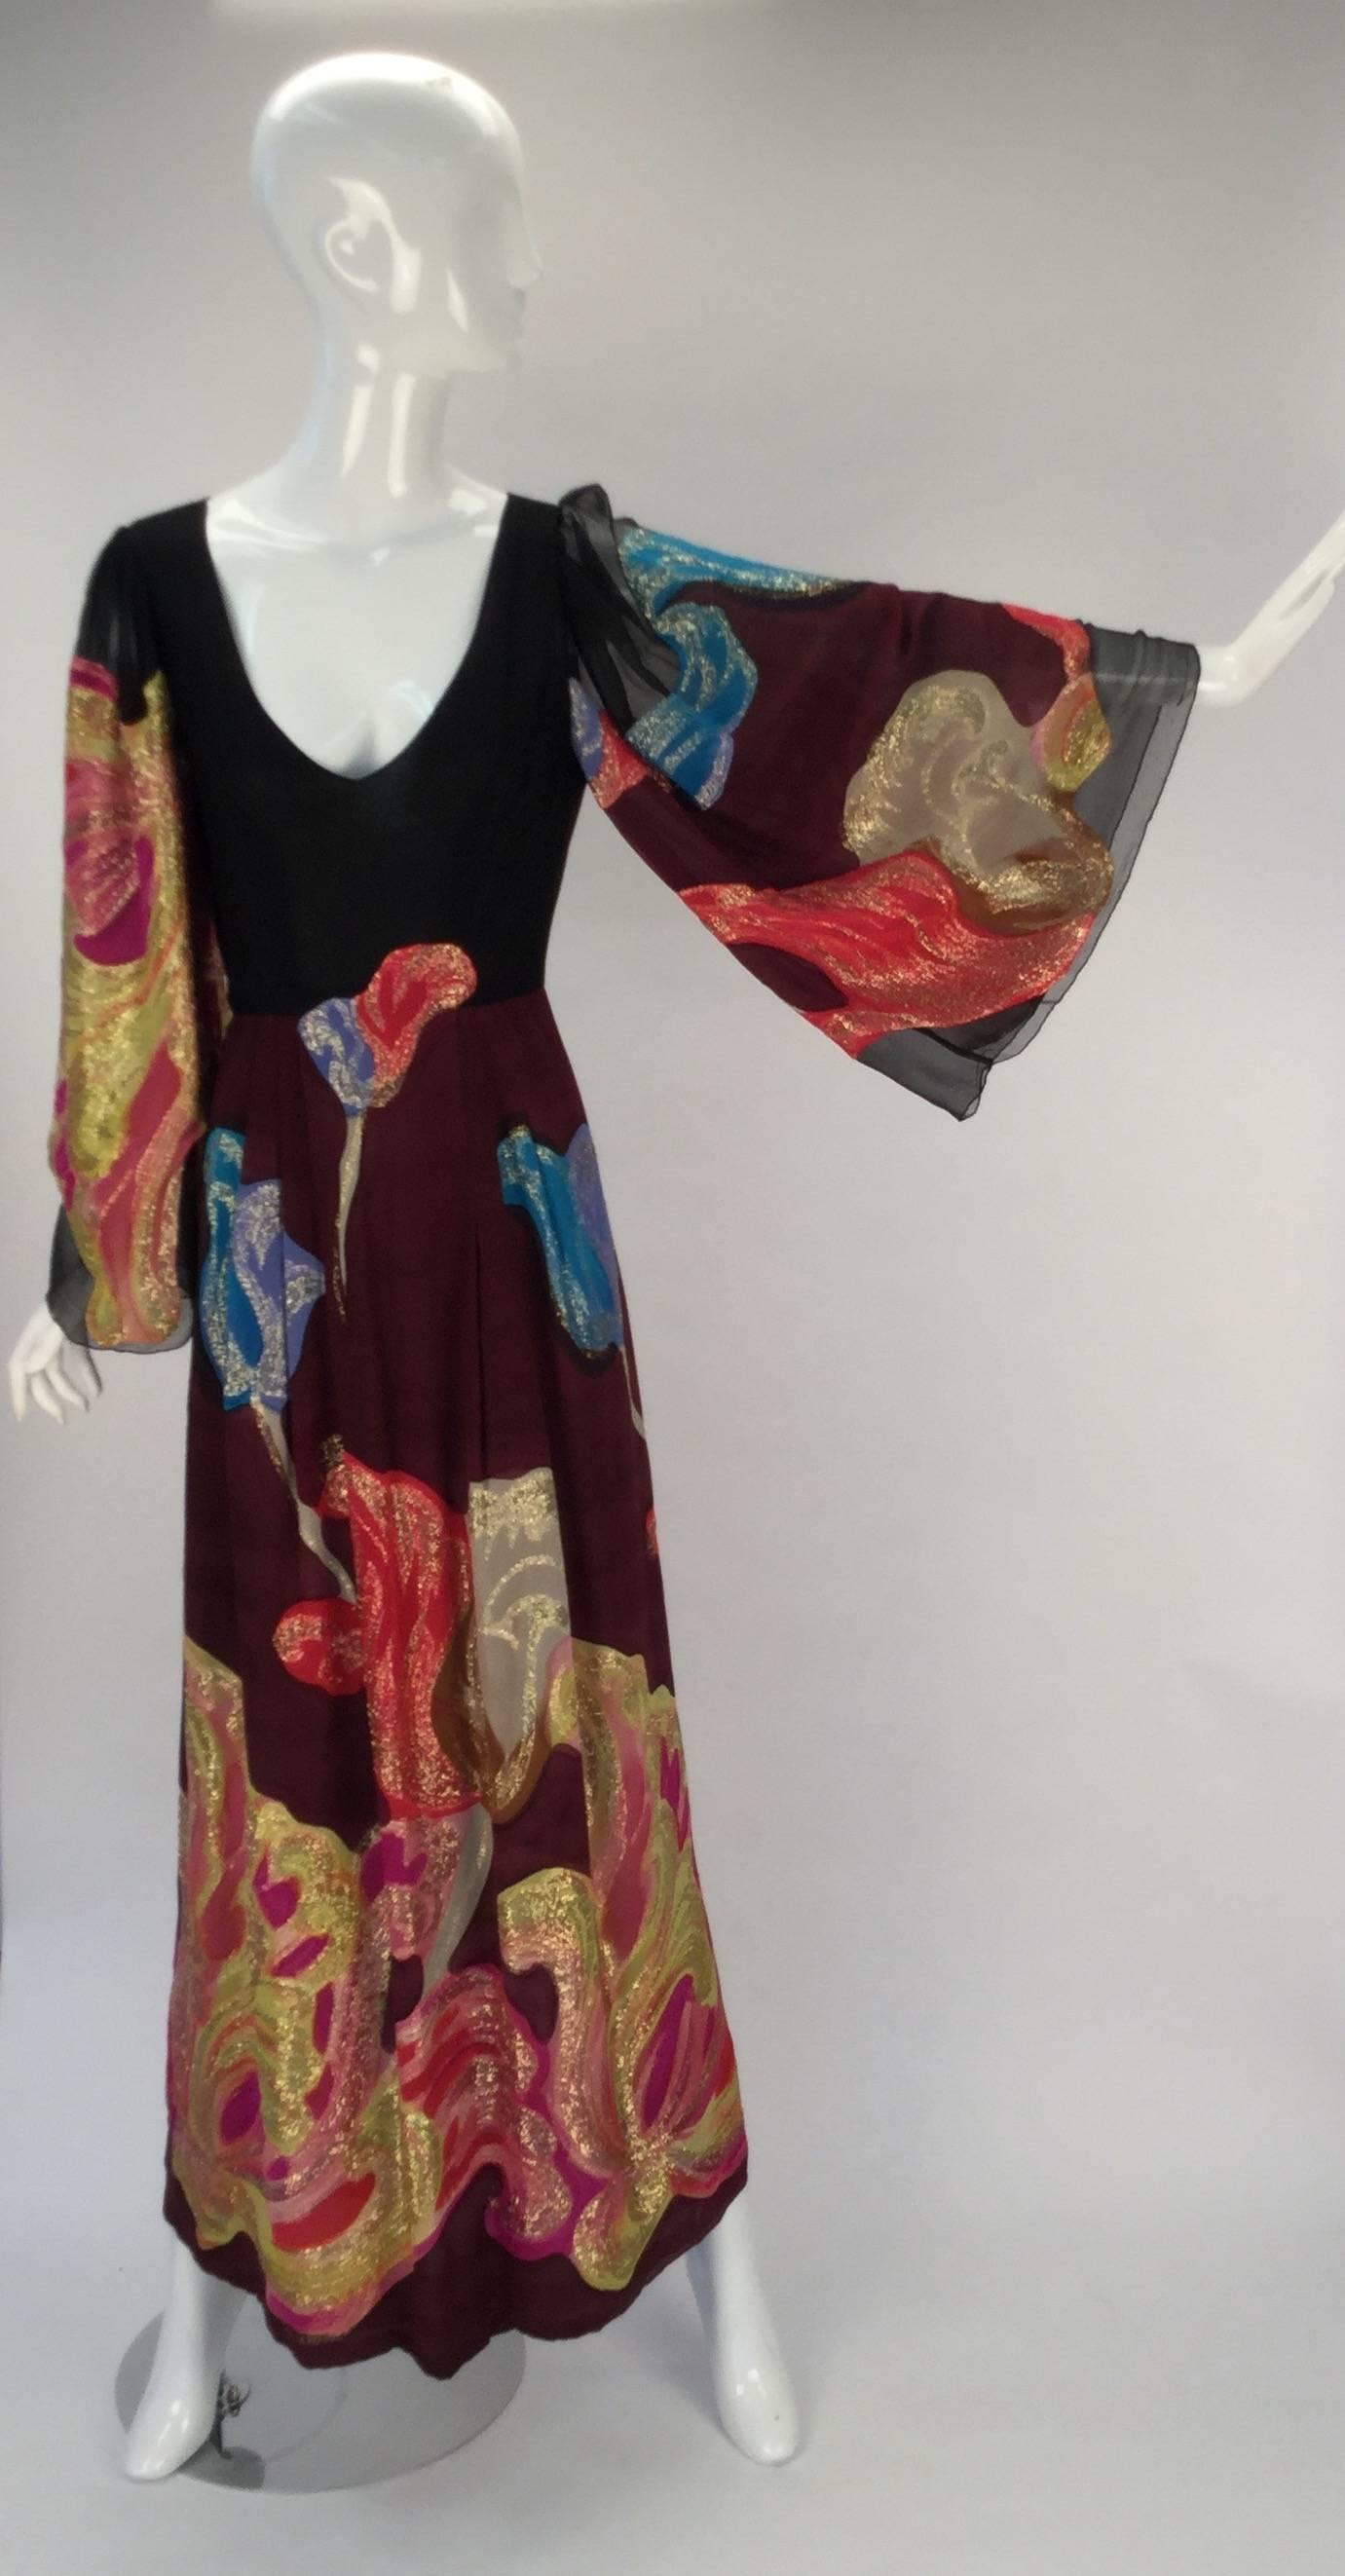 Exquisite late 1970s Pauline Trigere silk multicolored evening dress with gold metallic threading. Wonderful abstract design throughout with metallic threads. Semi sheer. Long sheer butterfly sleeves. V neckline. Skirt is lined with a sheer fabric.